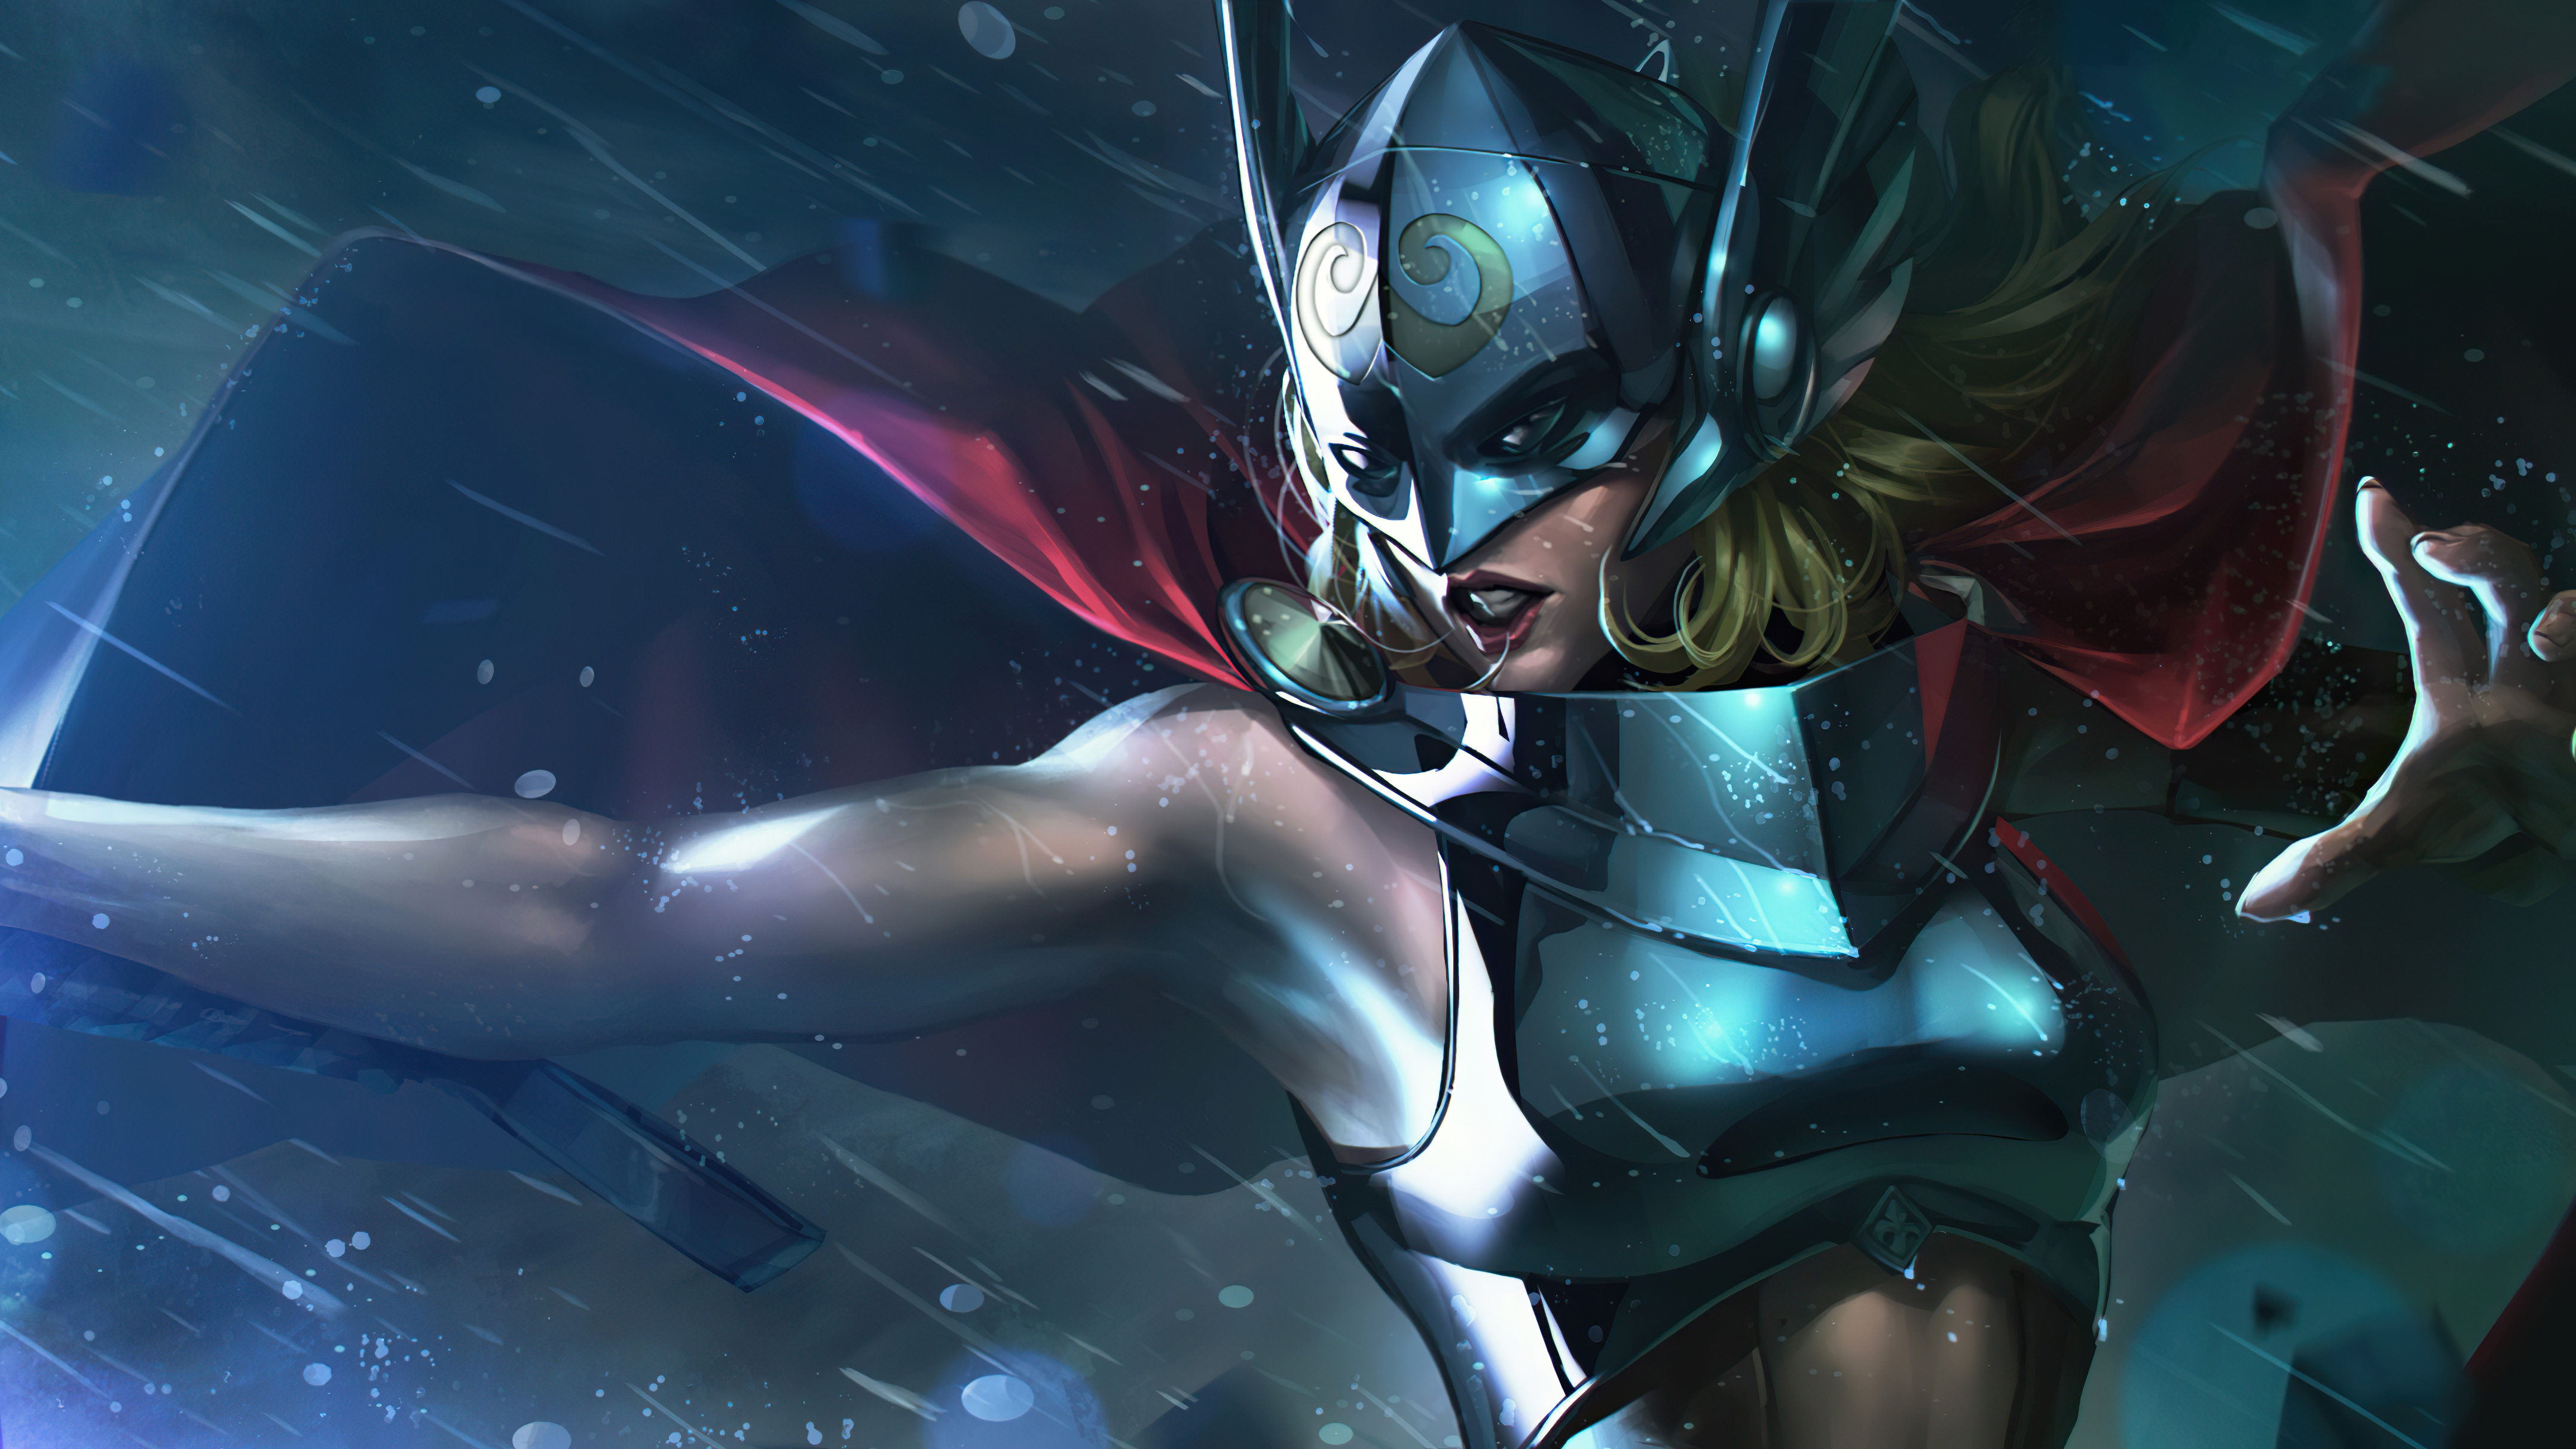 Jane Foster Art Thor Wallpapers